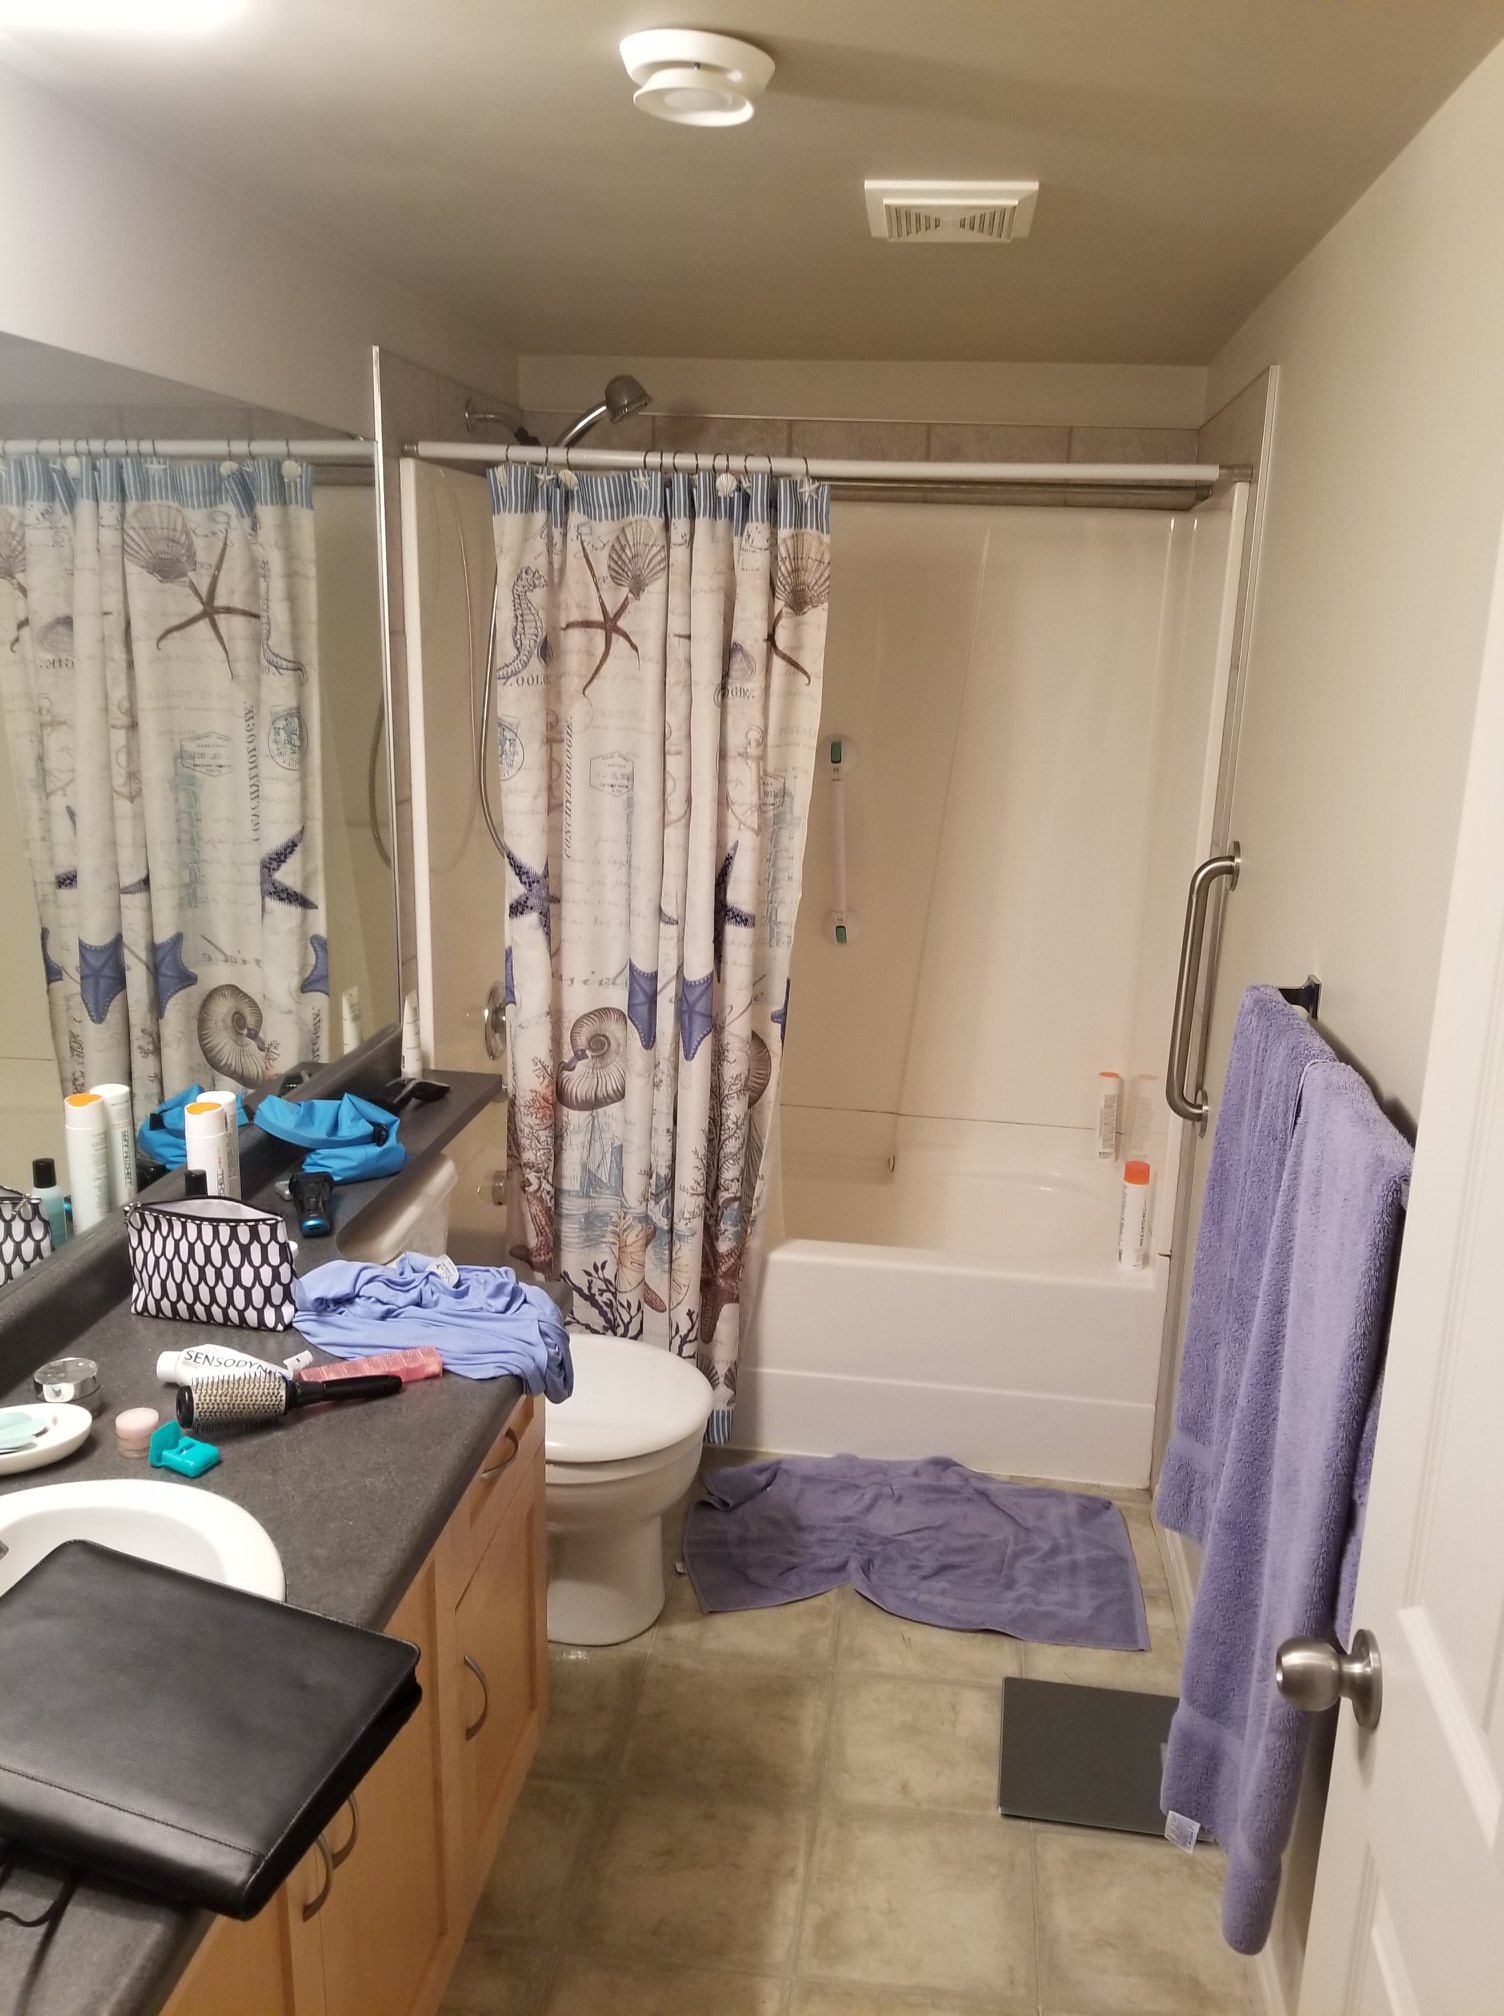 The old bathroom had a standard tub that was not accessible to an aging in place lifestyle. Additional challenges around storage that were address in the renovation.